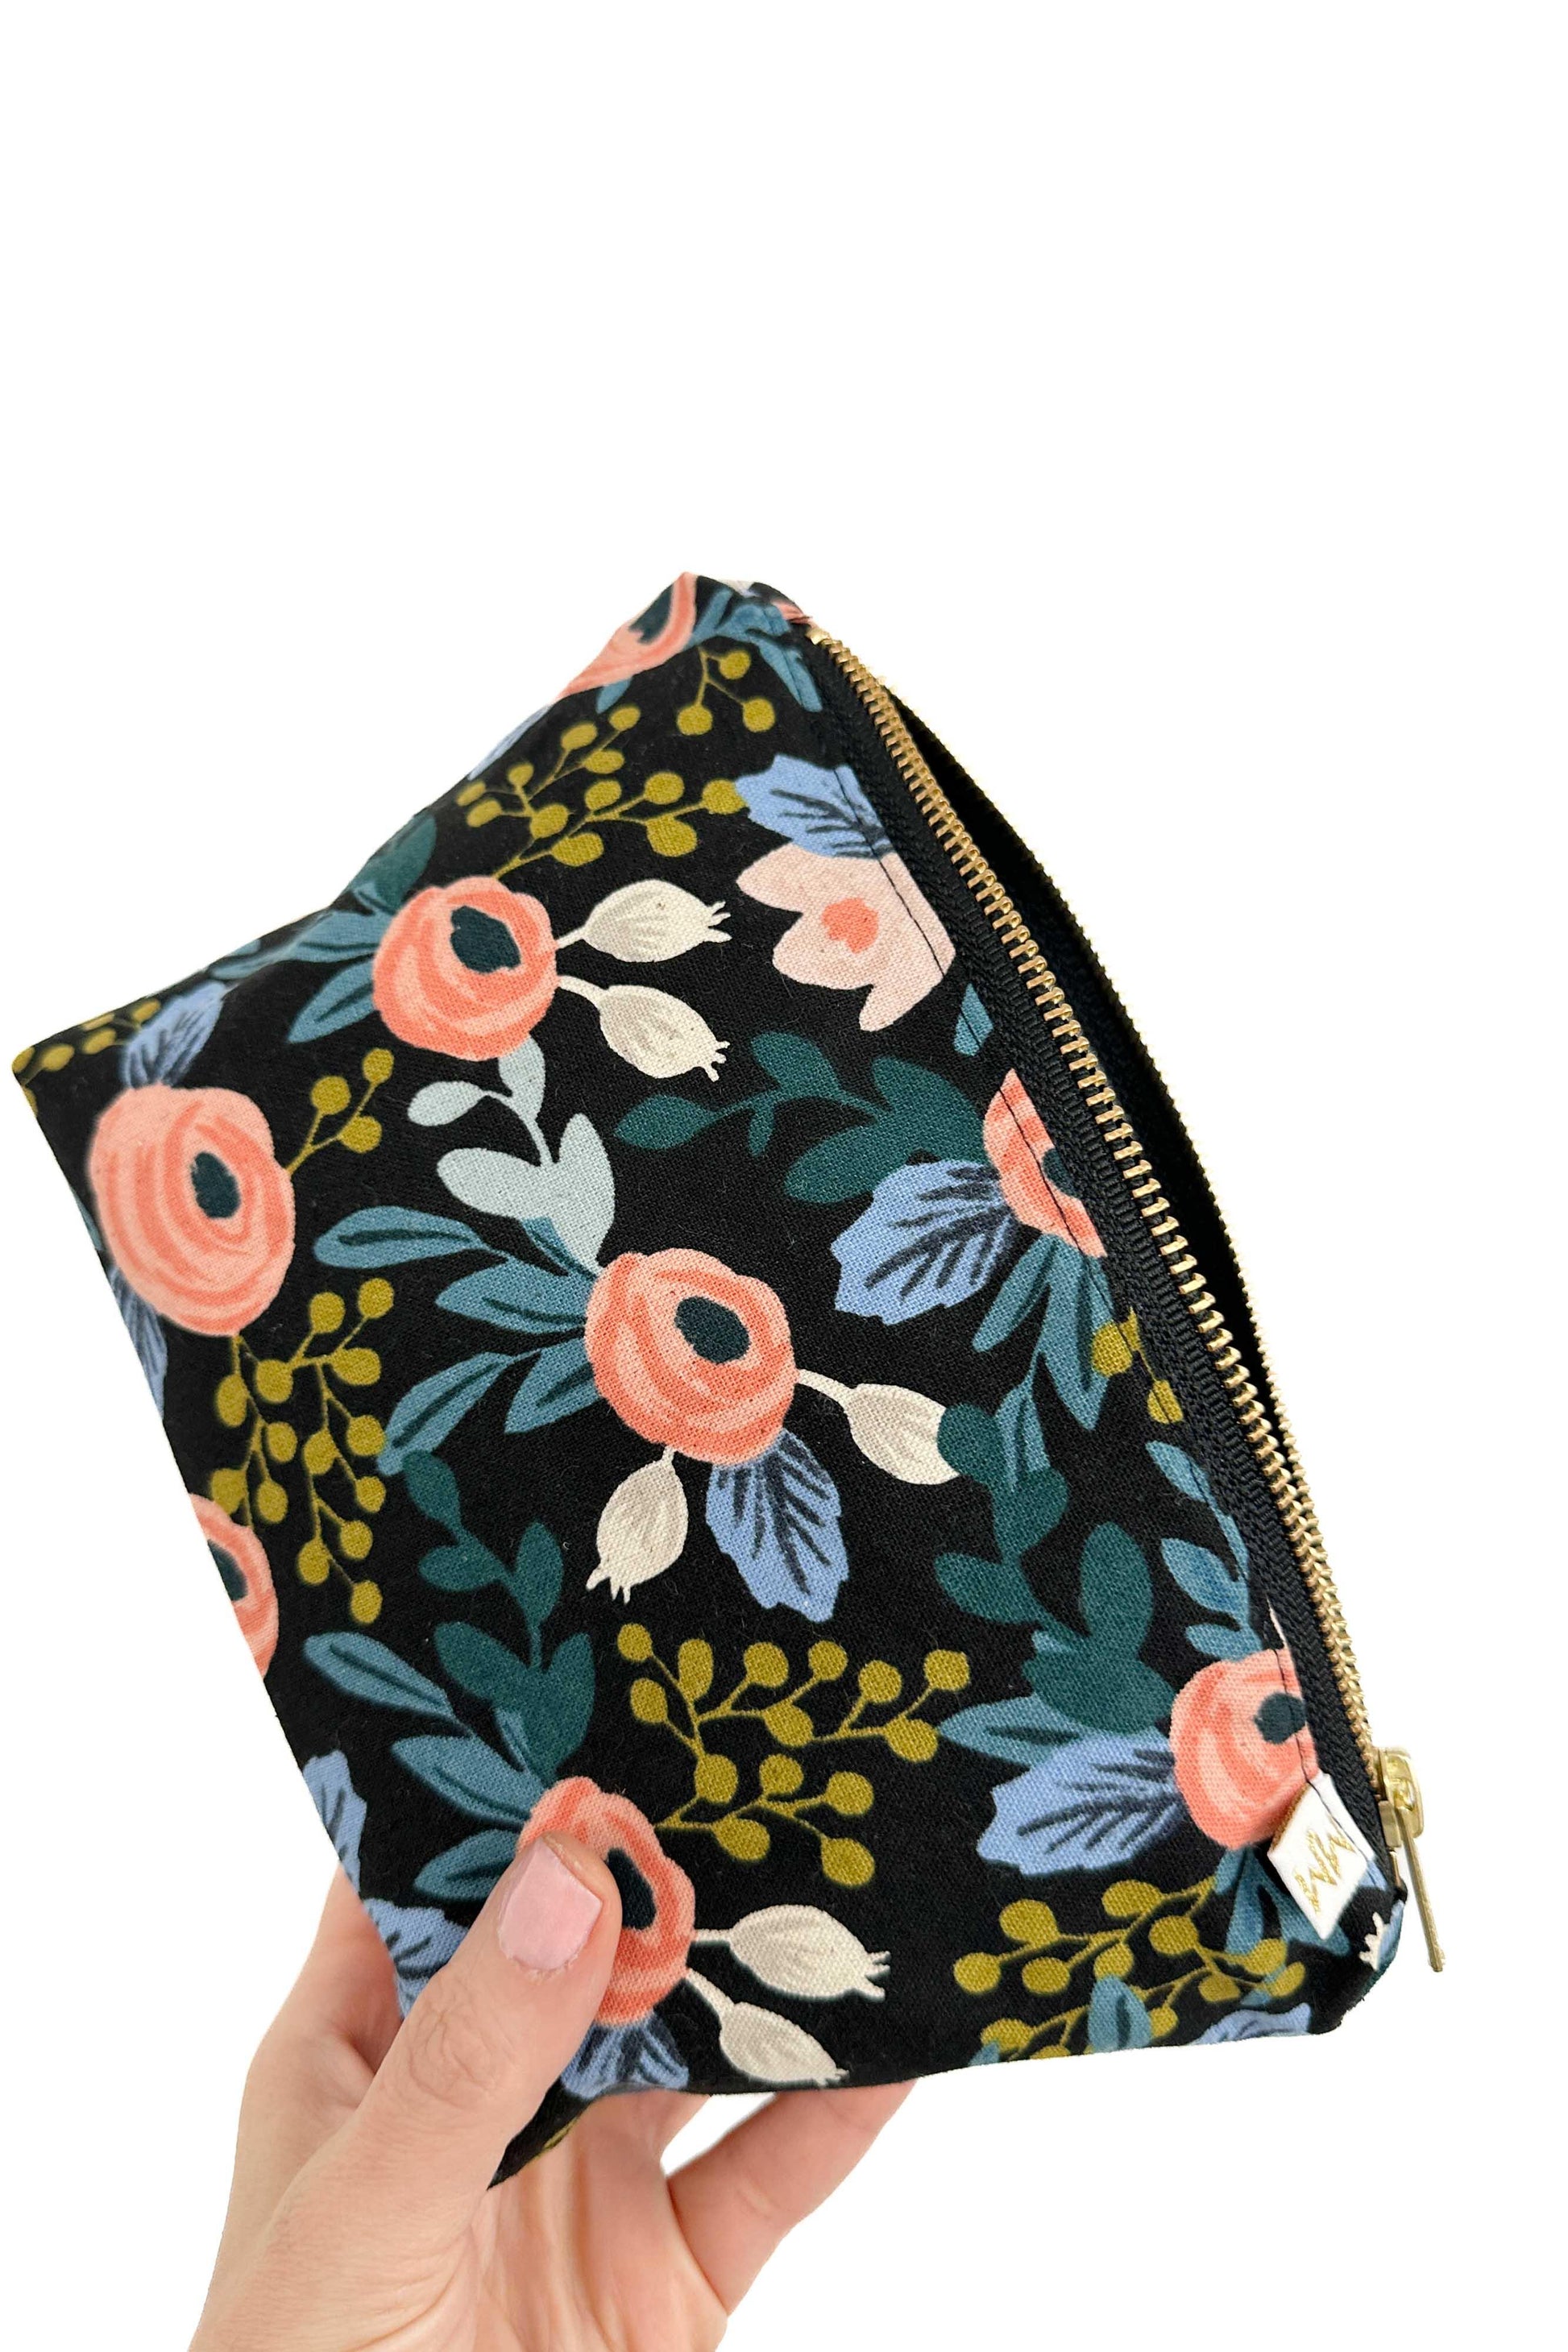 Midnight Garden Mini Maxx Travel Bag with Compartments READY TO SHIP - Modern Makerie